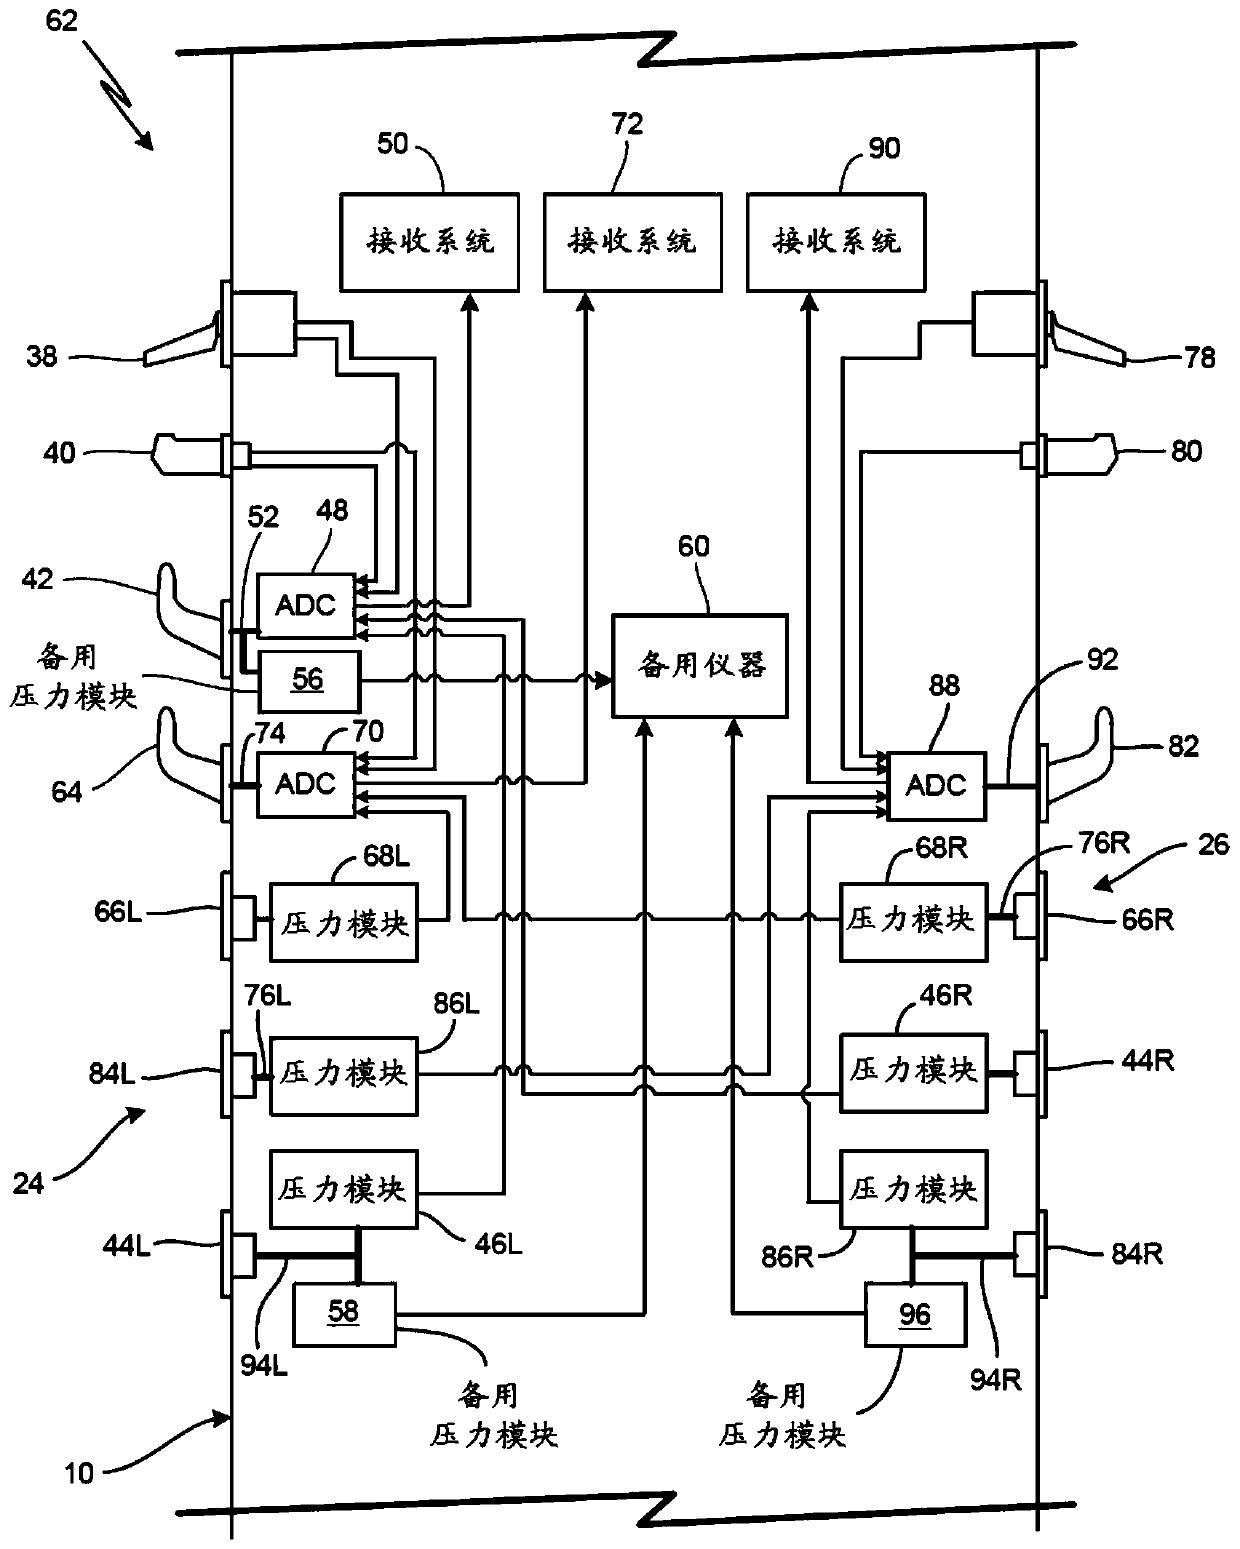 Advanced air data system architecture with air data computer incorporating enhanced compensation functionality